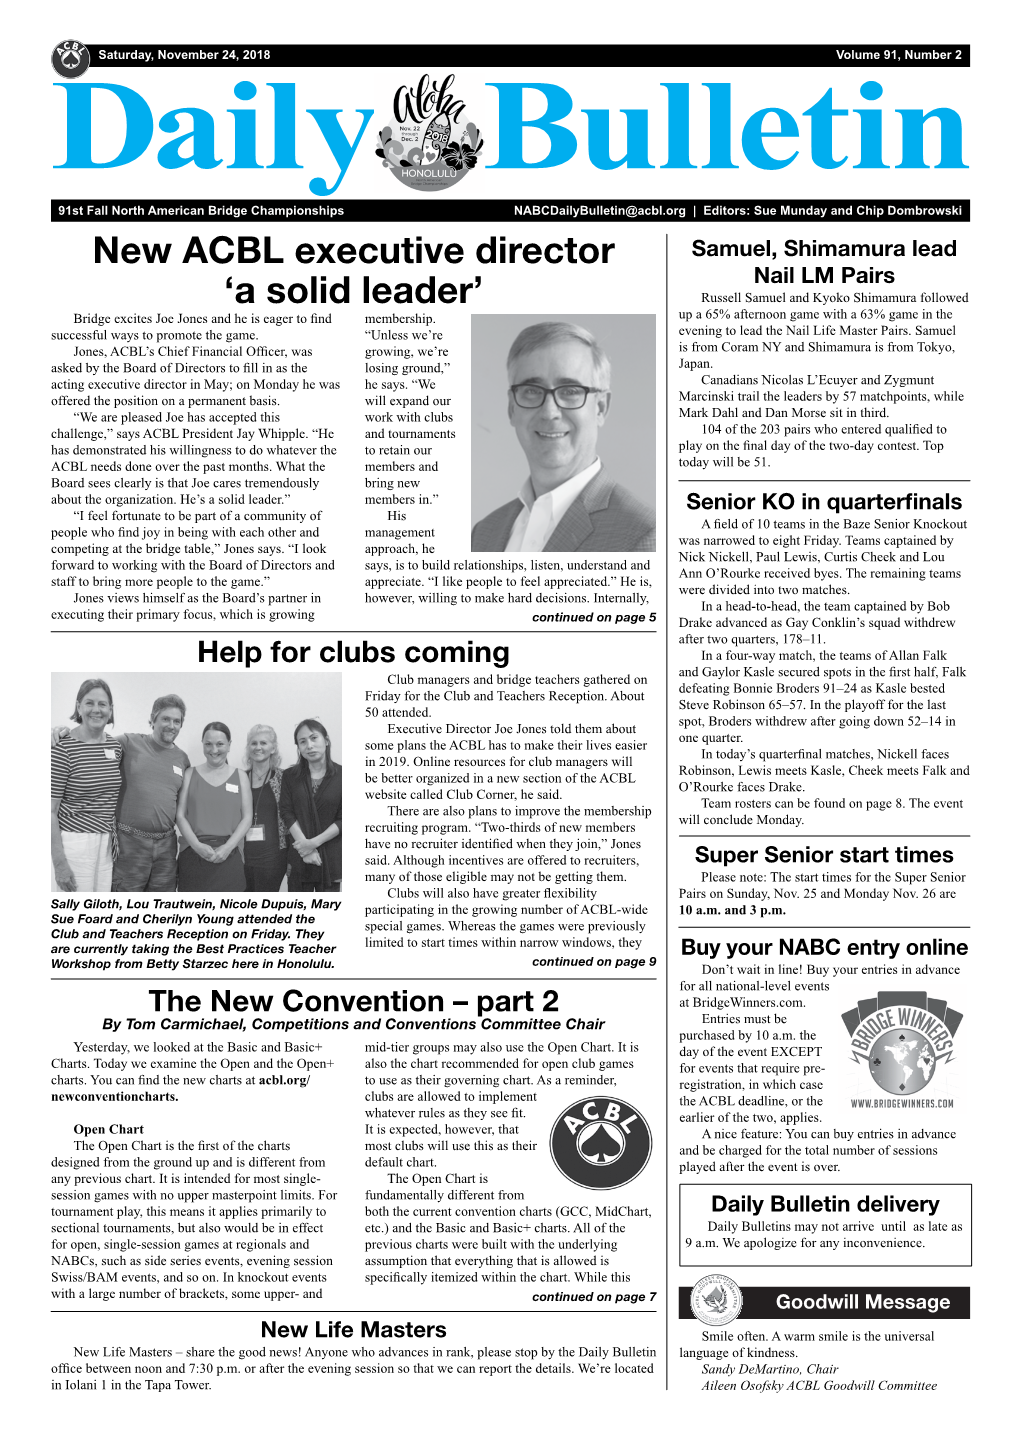 New ACBL Executive Director 'A Solid Leader'